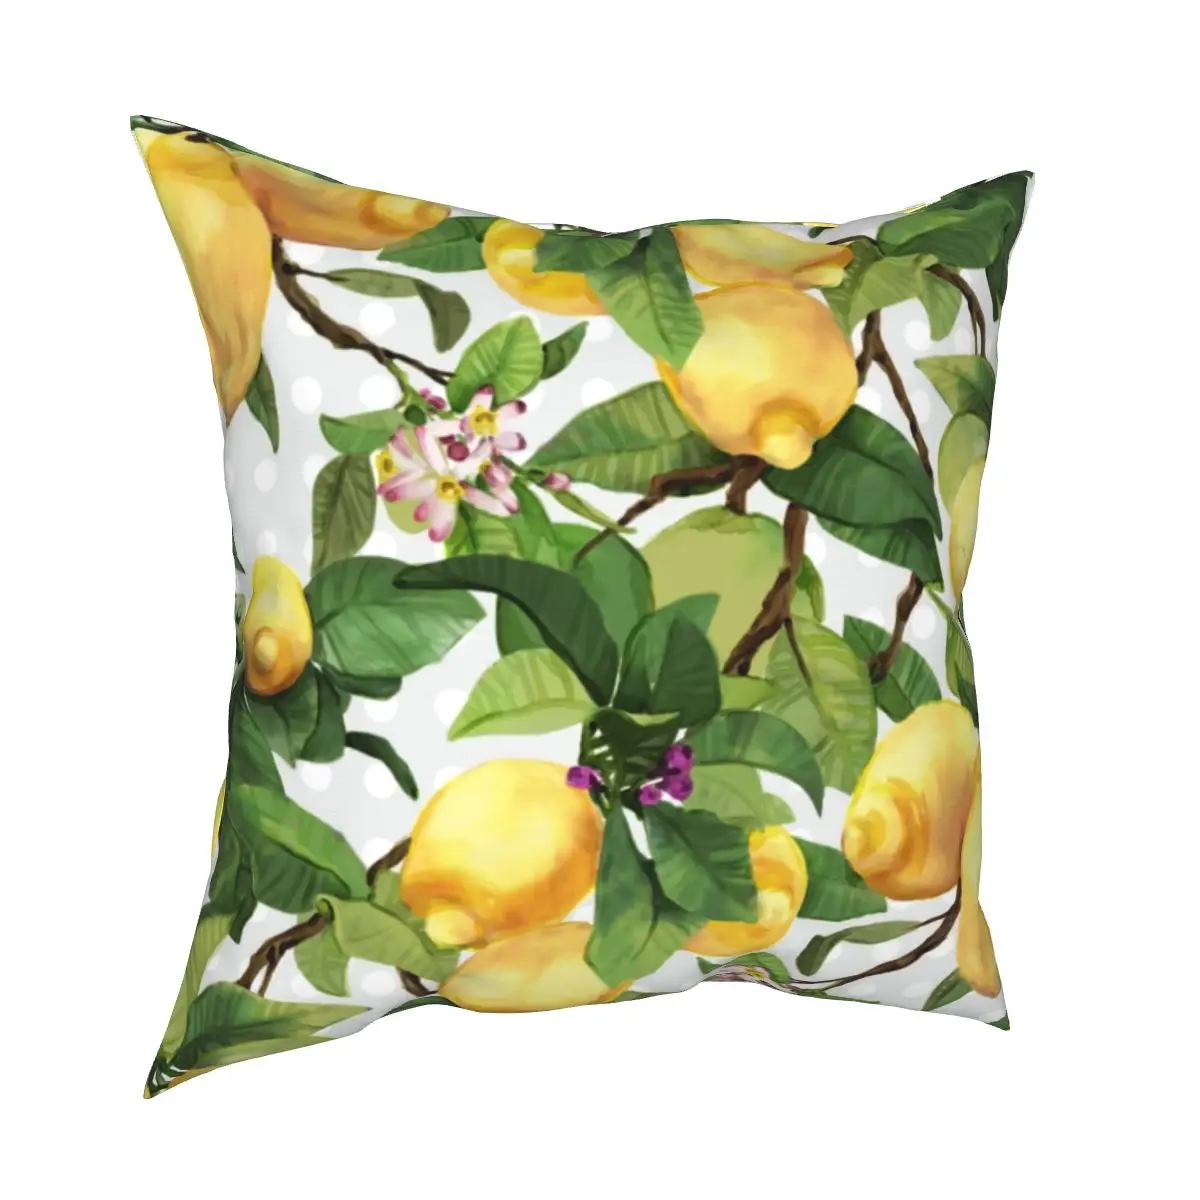 

Watercolor Lemon Pillowcase Printed Polyester Cushion Cover Decor Pillow Case Cover Bedroom Zippered 18"